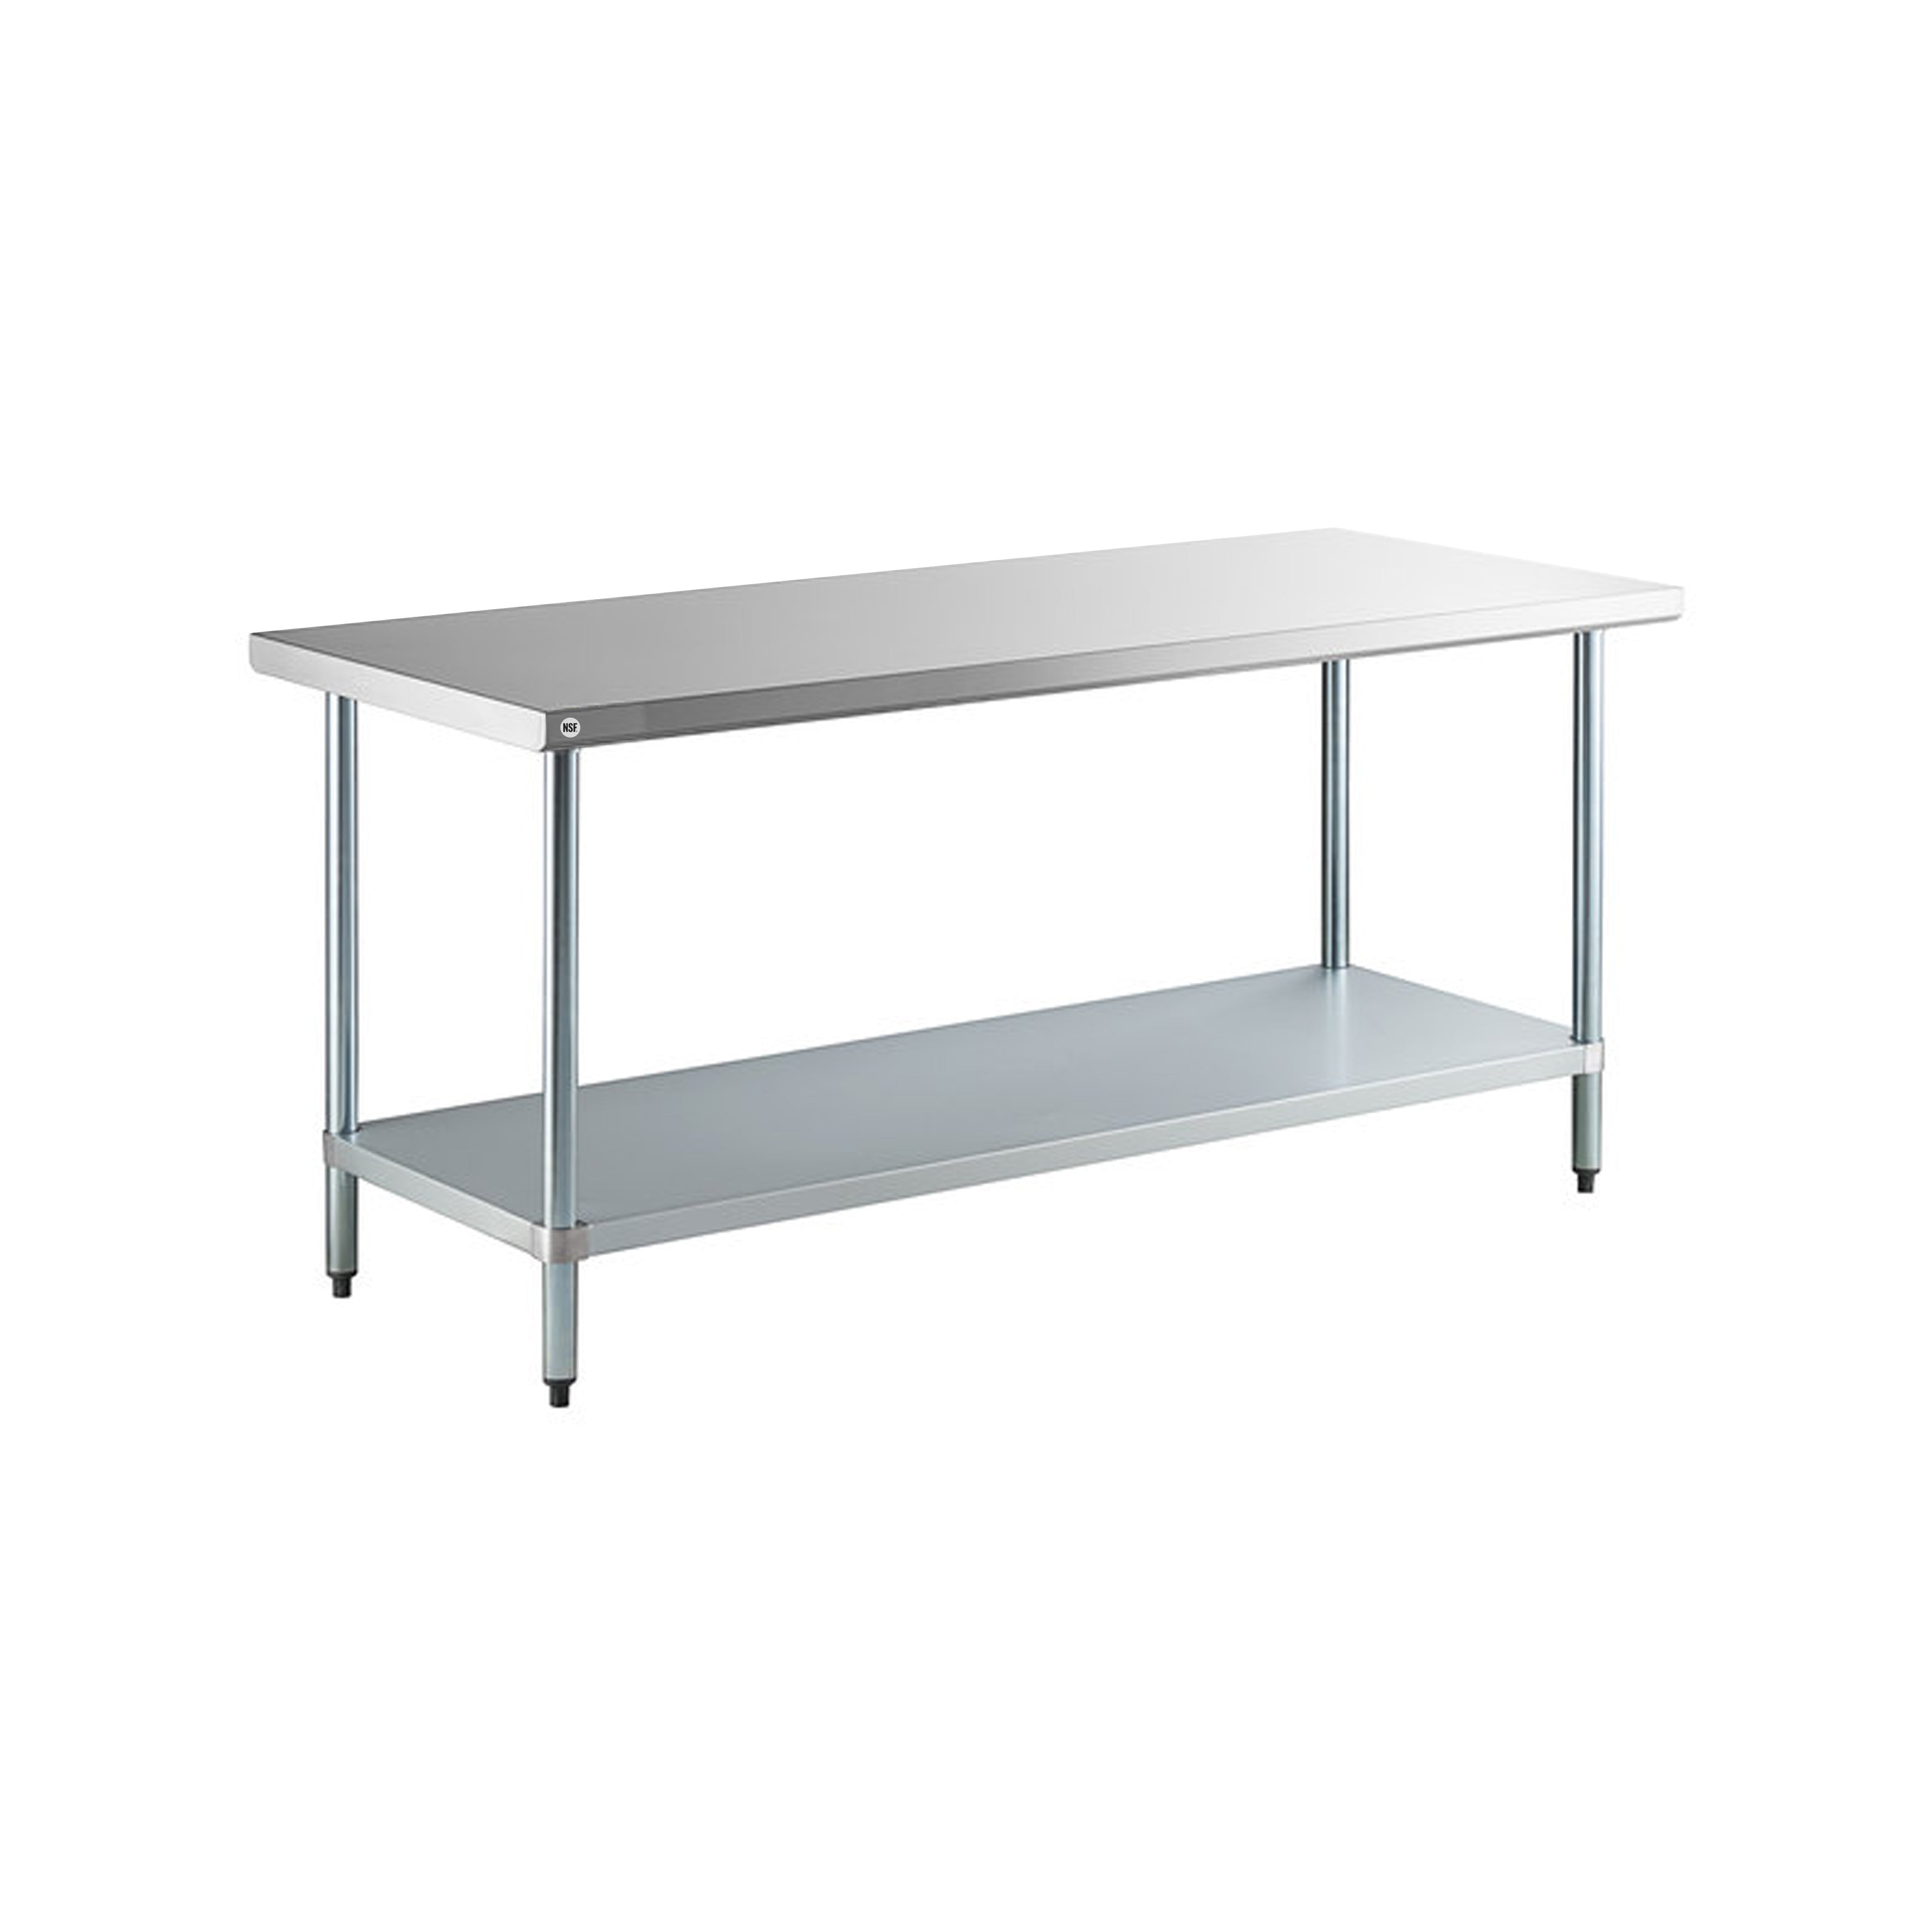 Omcan - 22069, Commercial 24" x 84" Stainless Steel Kitchen Work Table 1500lbs Light Duty